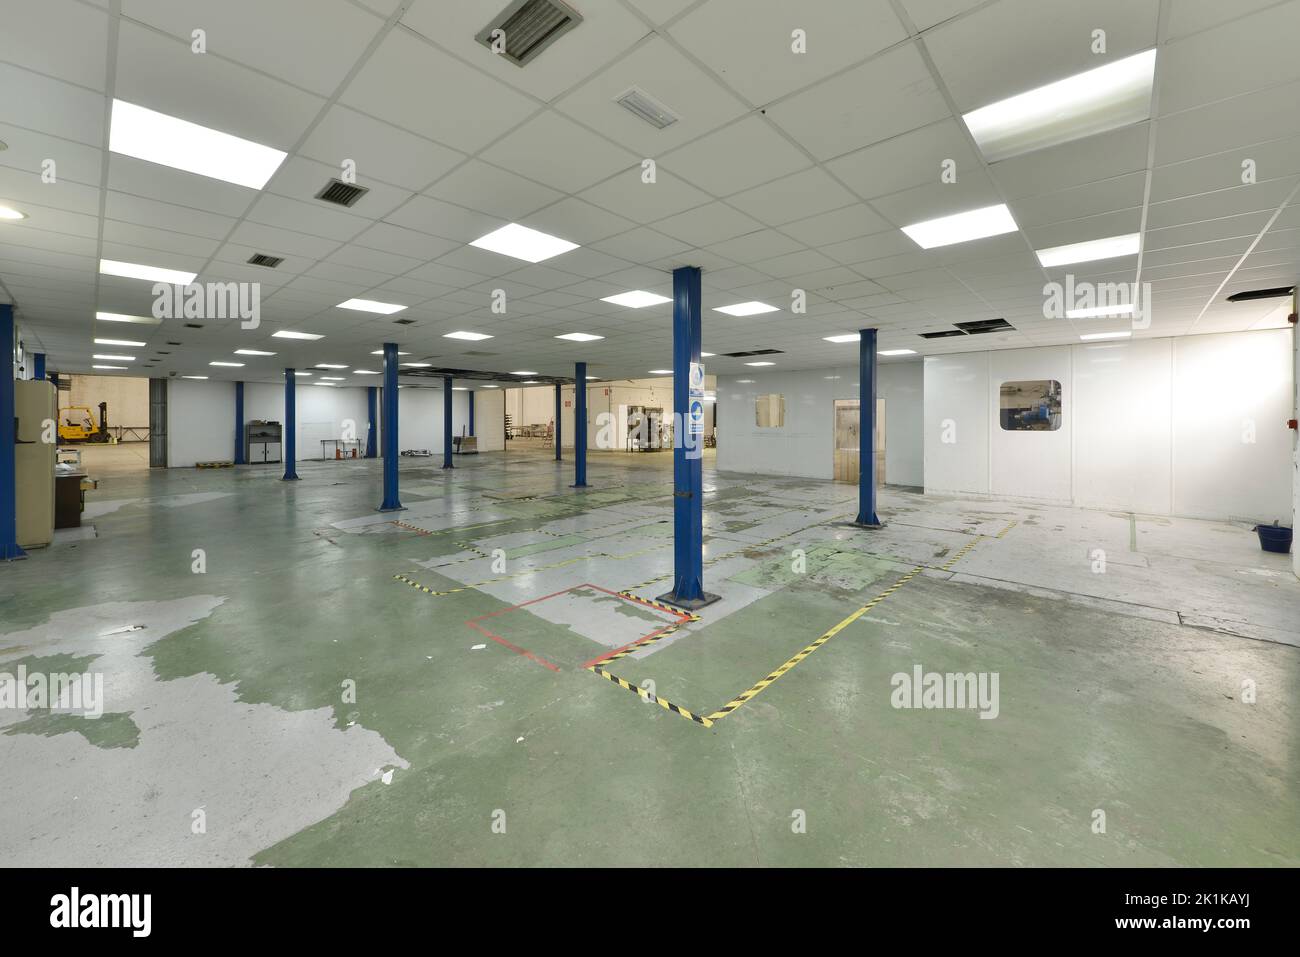 Empty industrial warehouse with blue metal columns, floors with green non-slip paint and technical ceilings with plasterboard ceilings Stock Photo